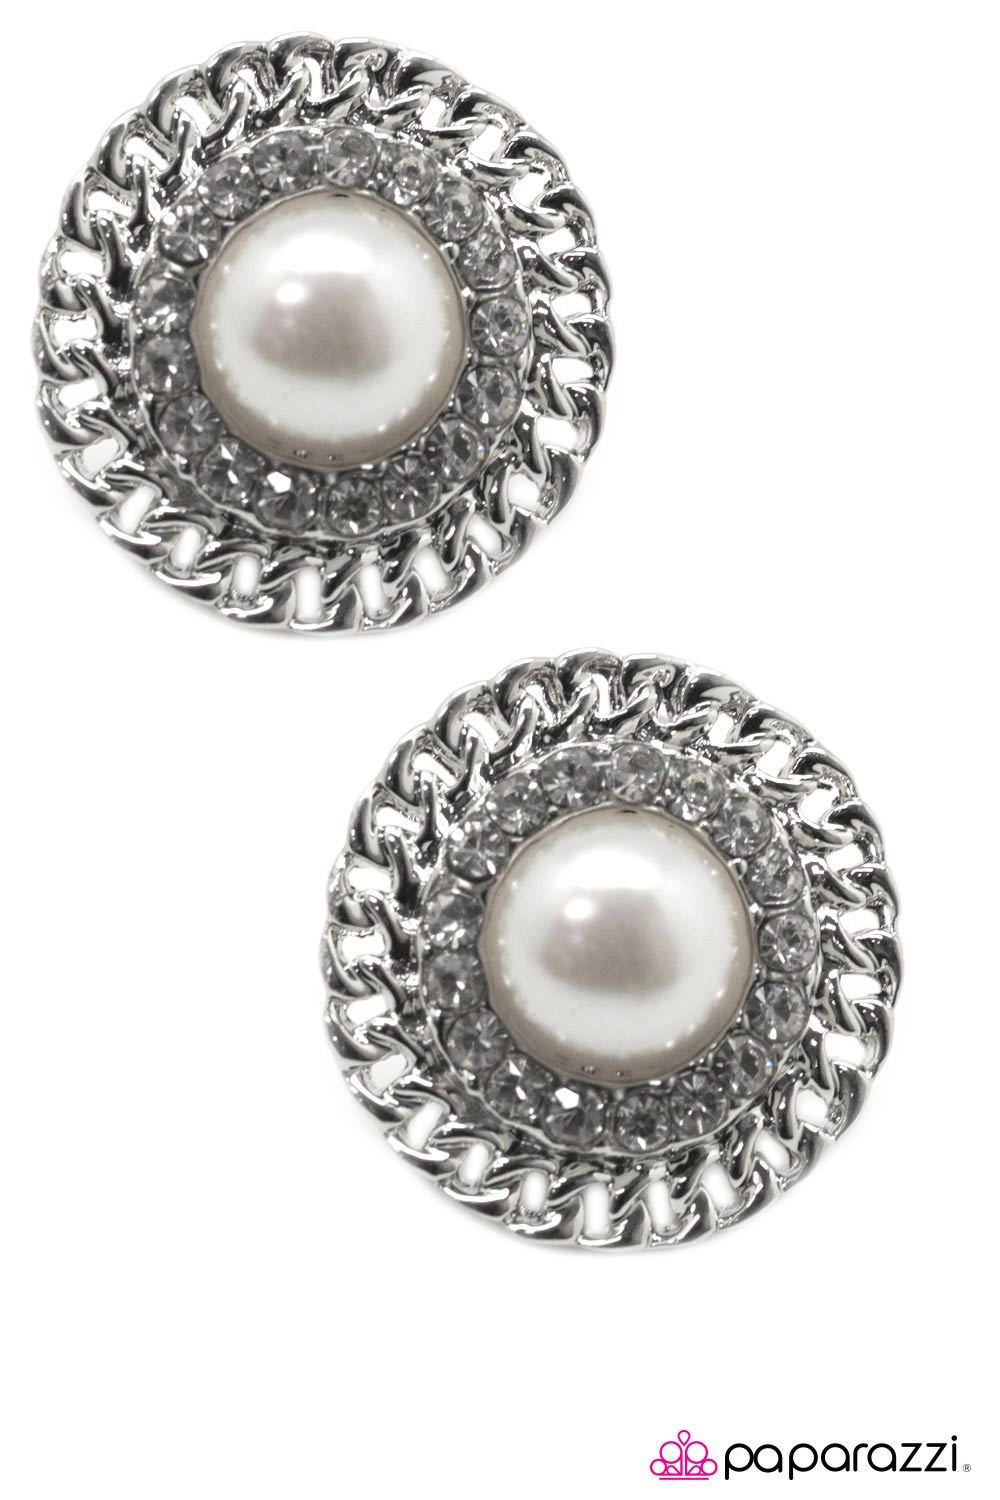 A Grand Gesture White Pearl Post Earrings - Paparazzi Accessories-CarasShop.com - $5 Jewelry by Cara Jewels